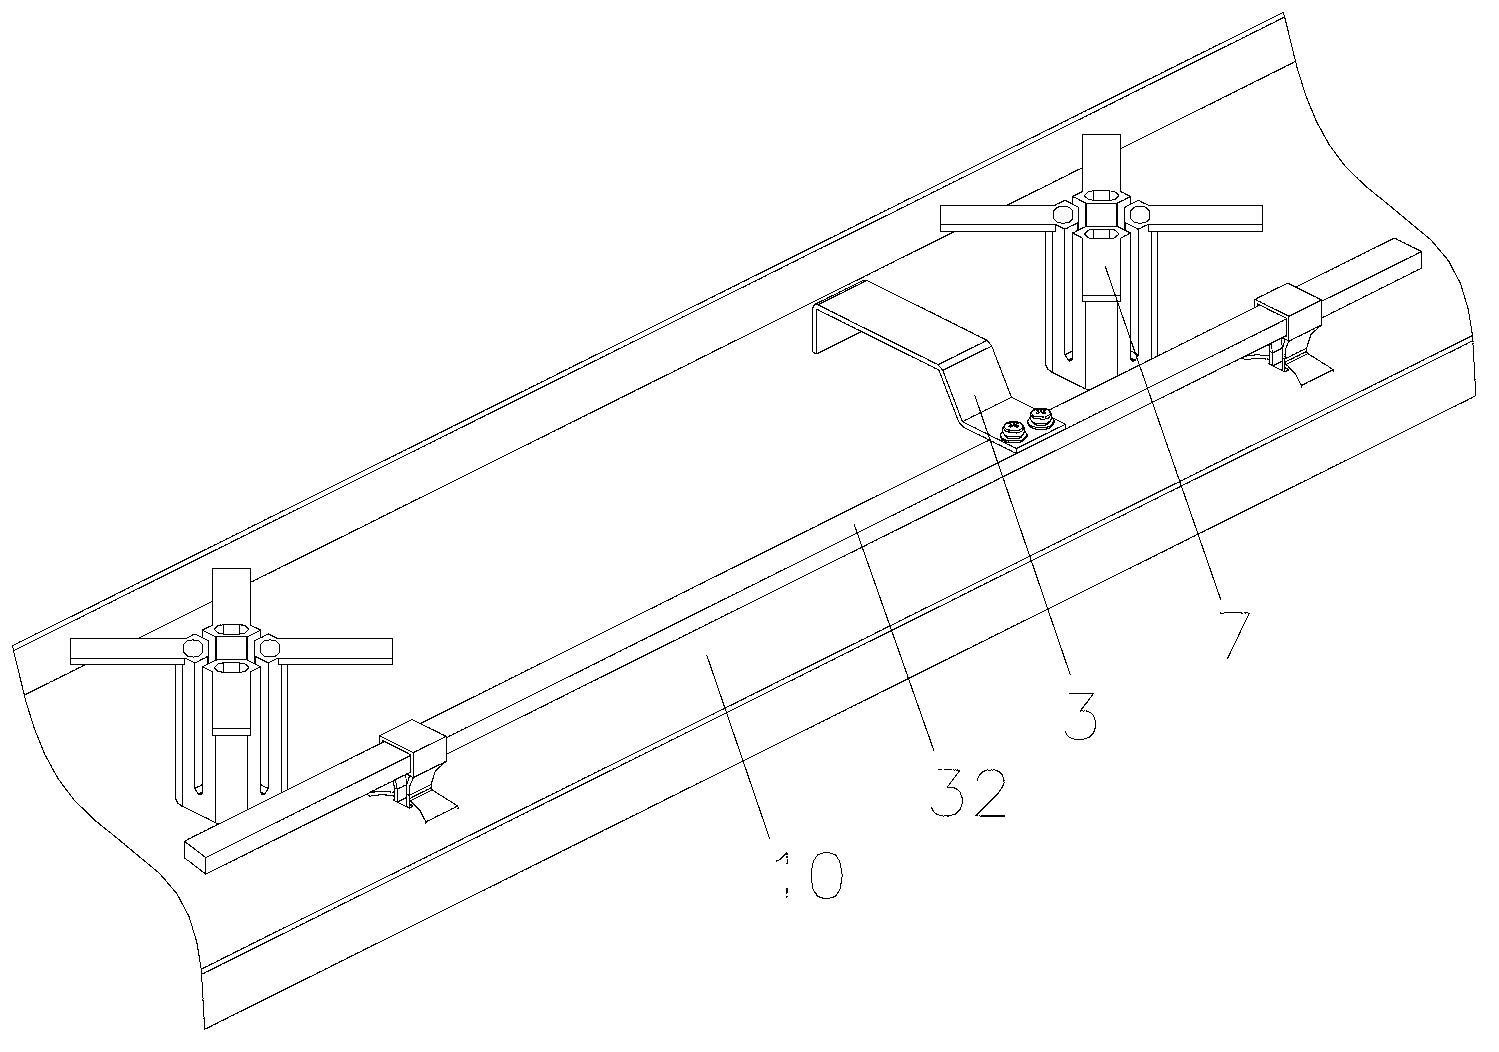 Antenna with multiple signal feed ports